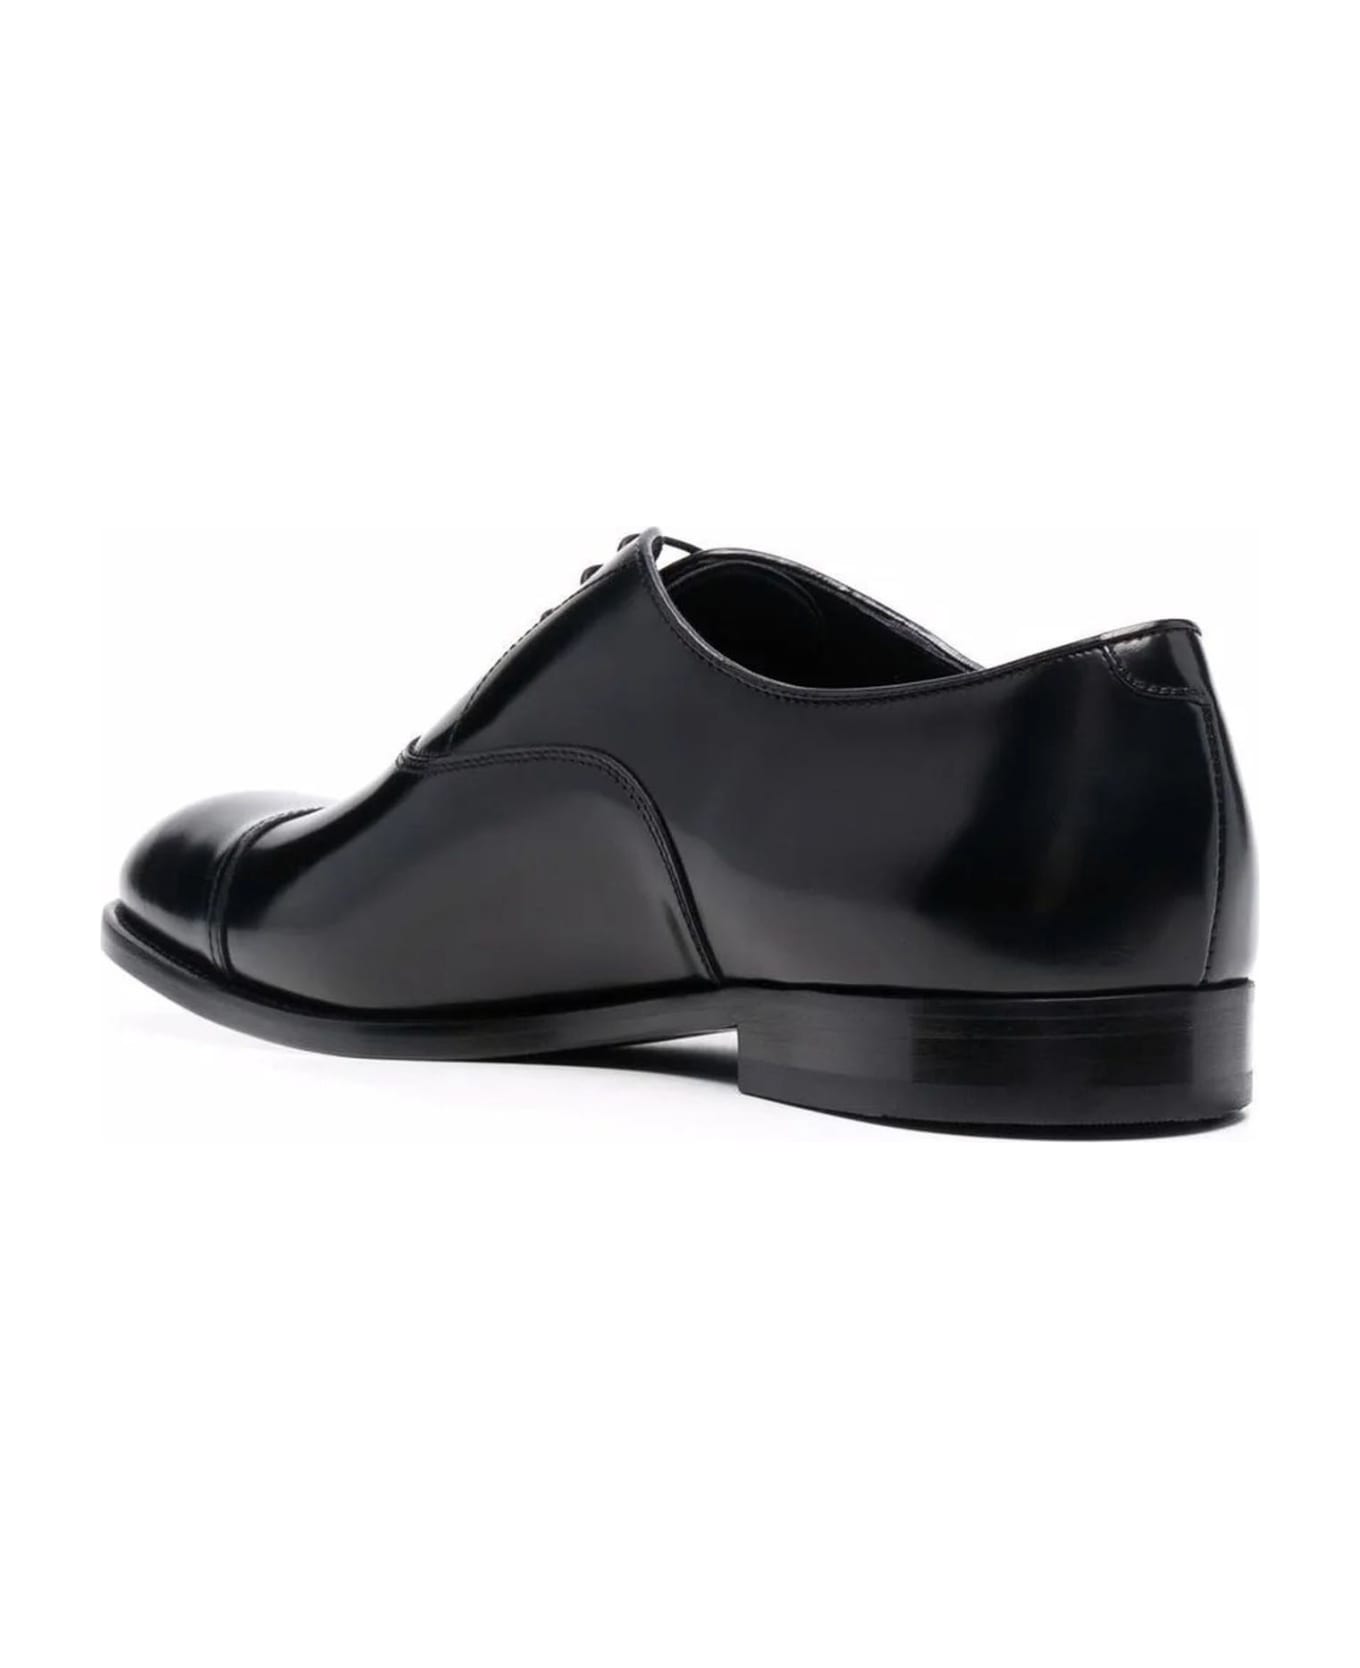 Doucal's Black Leather Lace Up Oxford Shoes - Black ローファー＆デッキシューズ